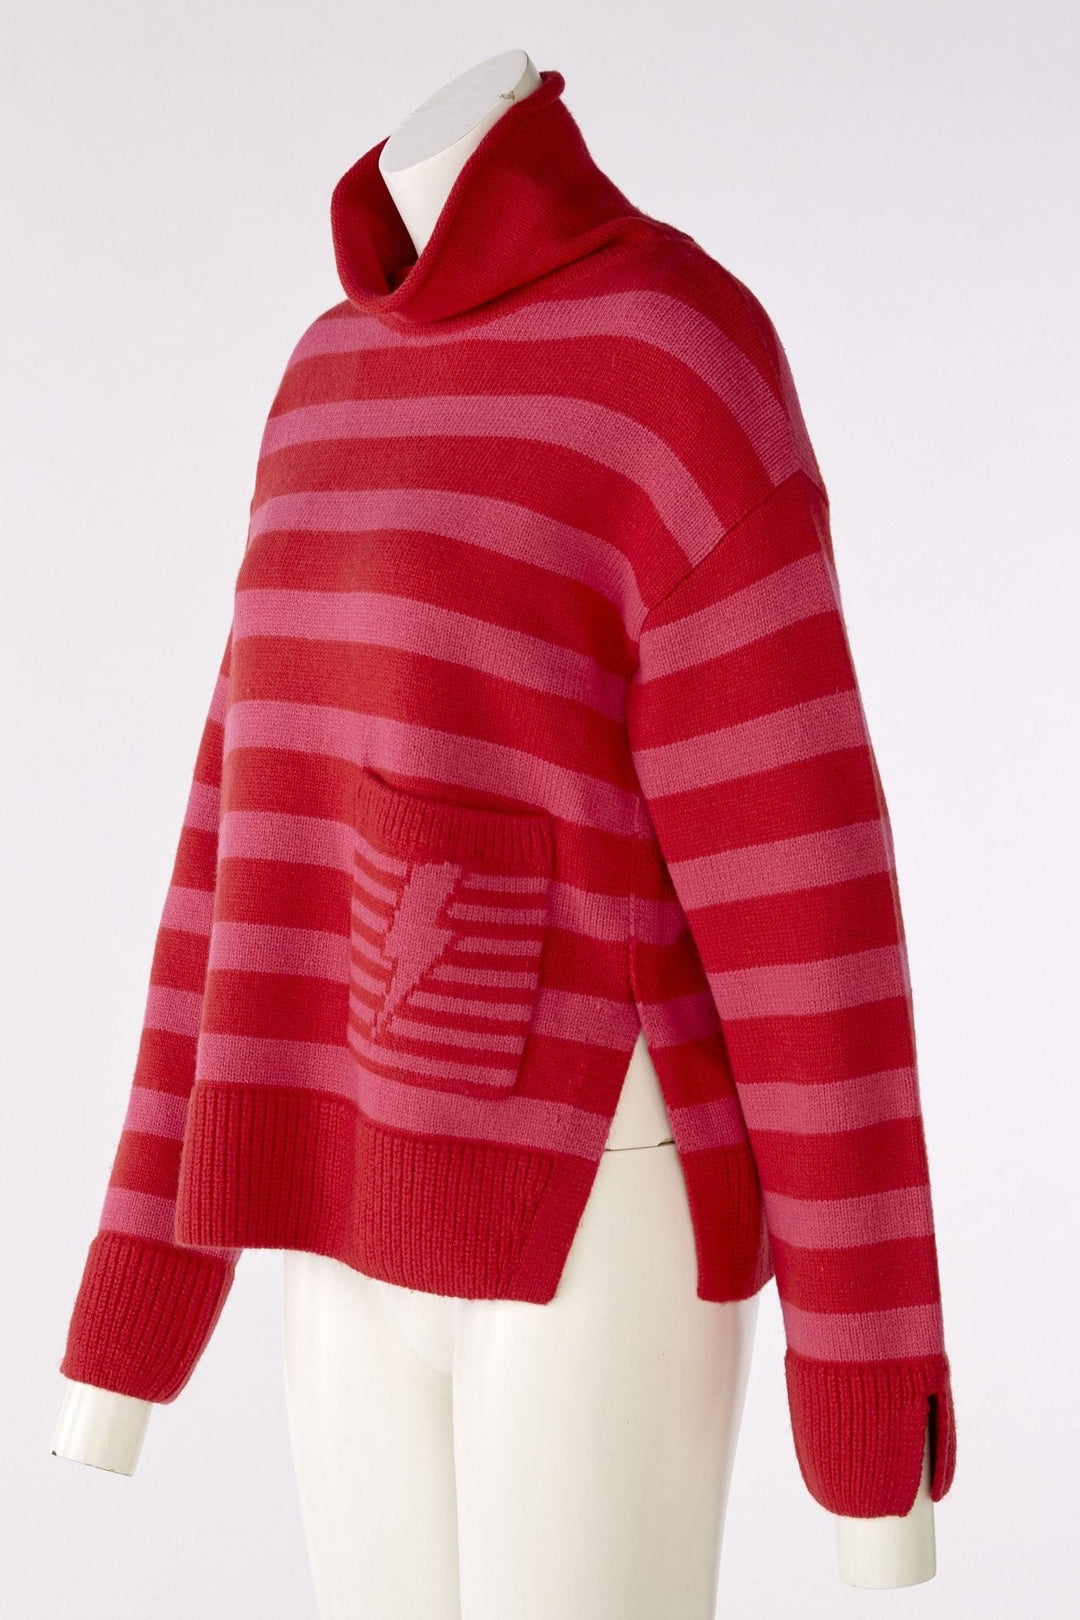 Oui Stripped Cowl Neck Knitted Jumper In Red & Coral - Crabtree Cottage